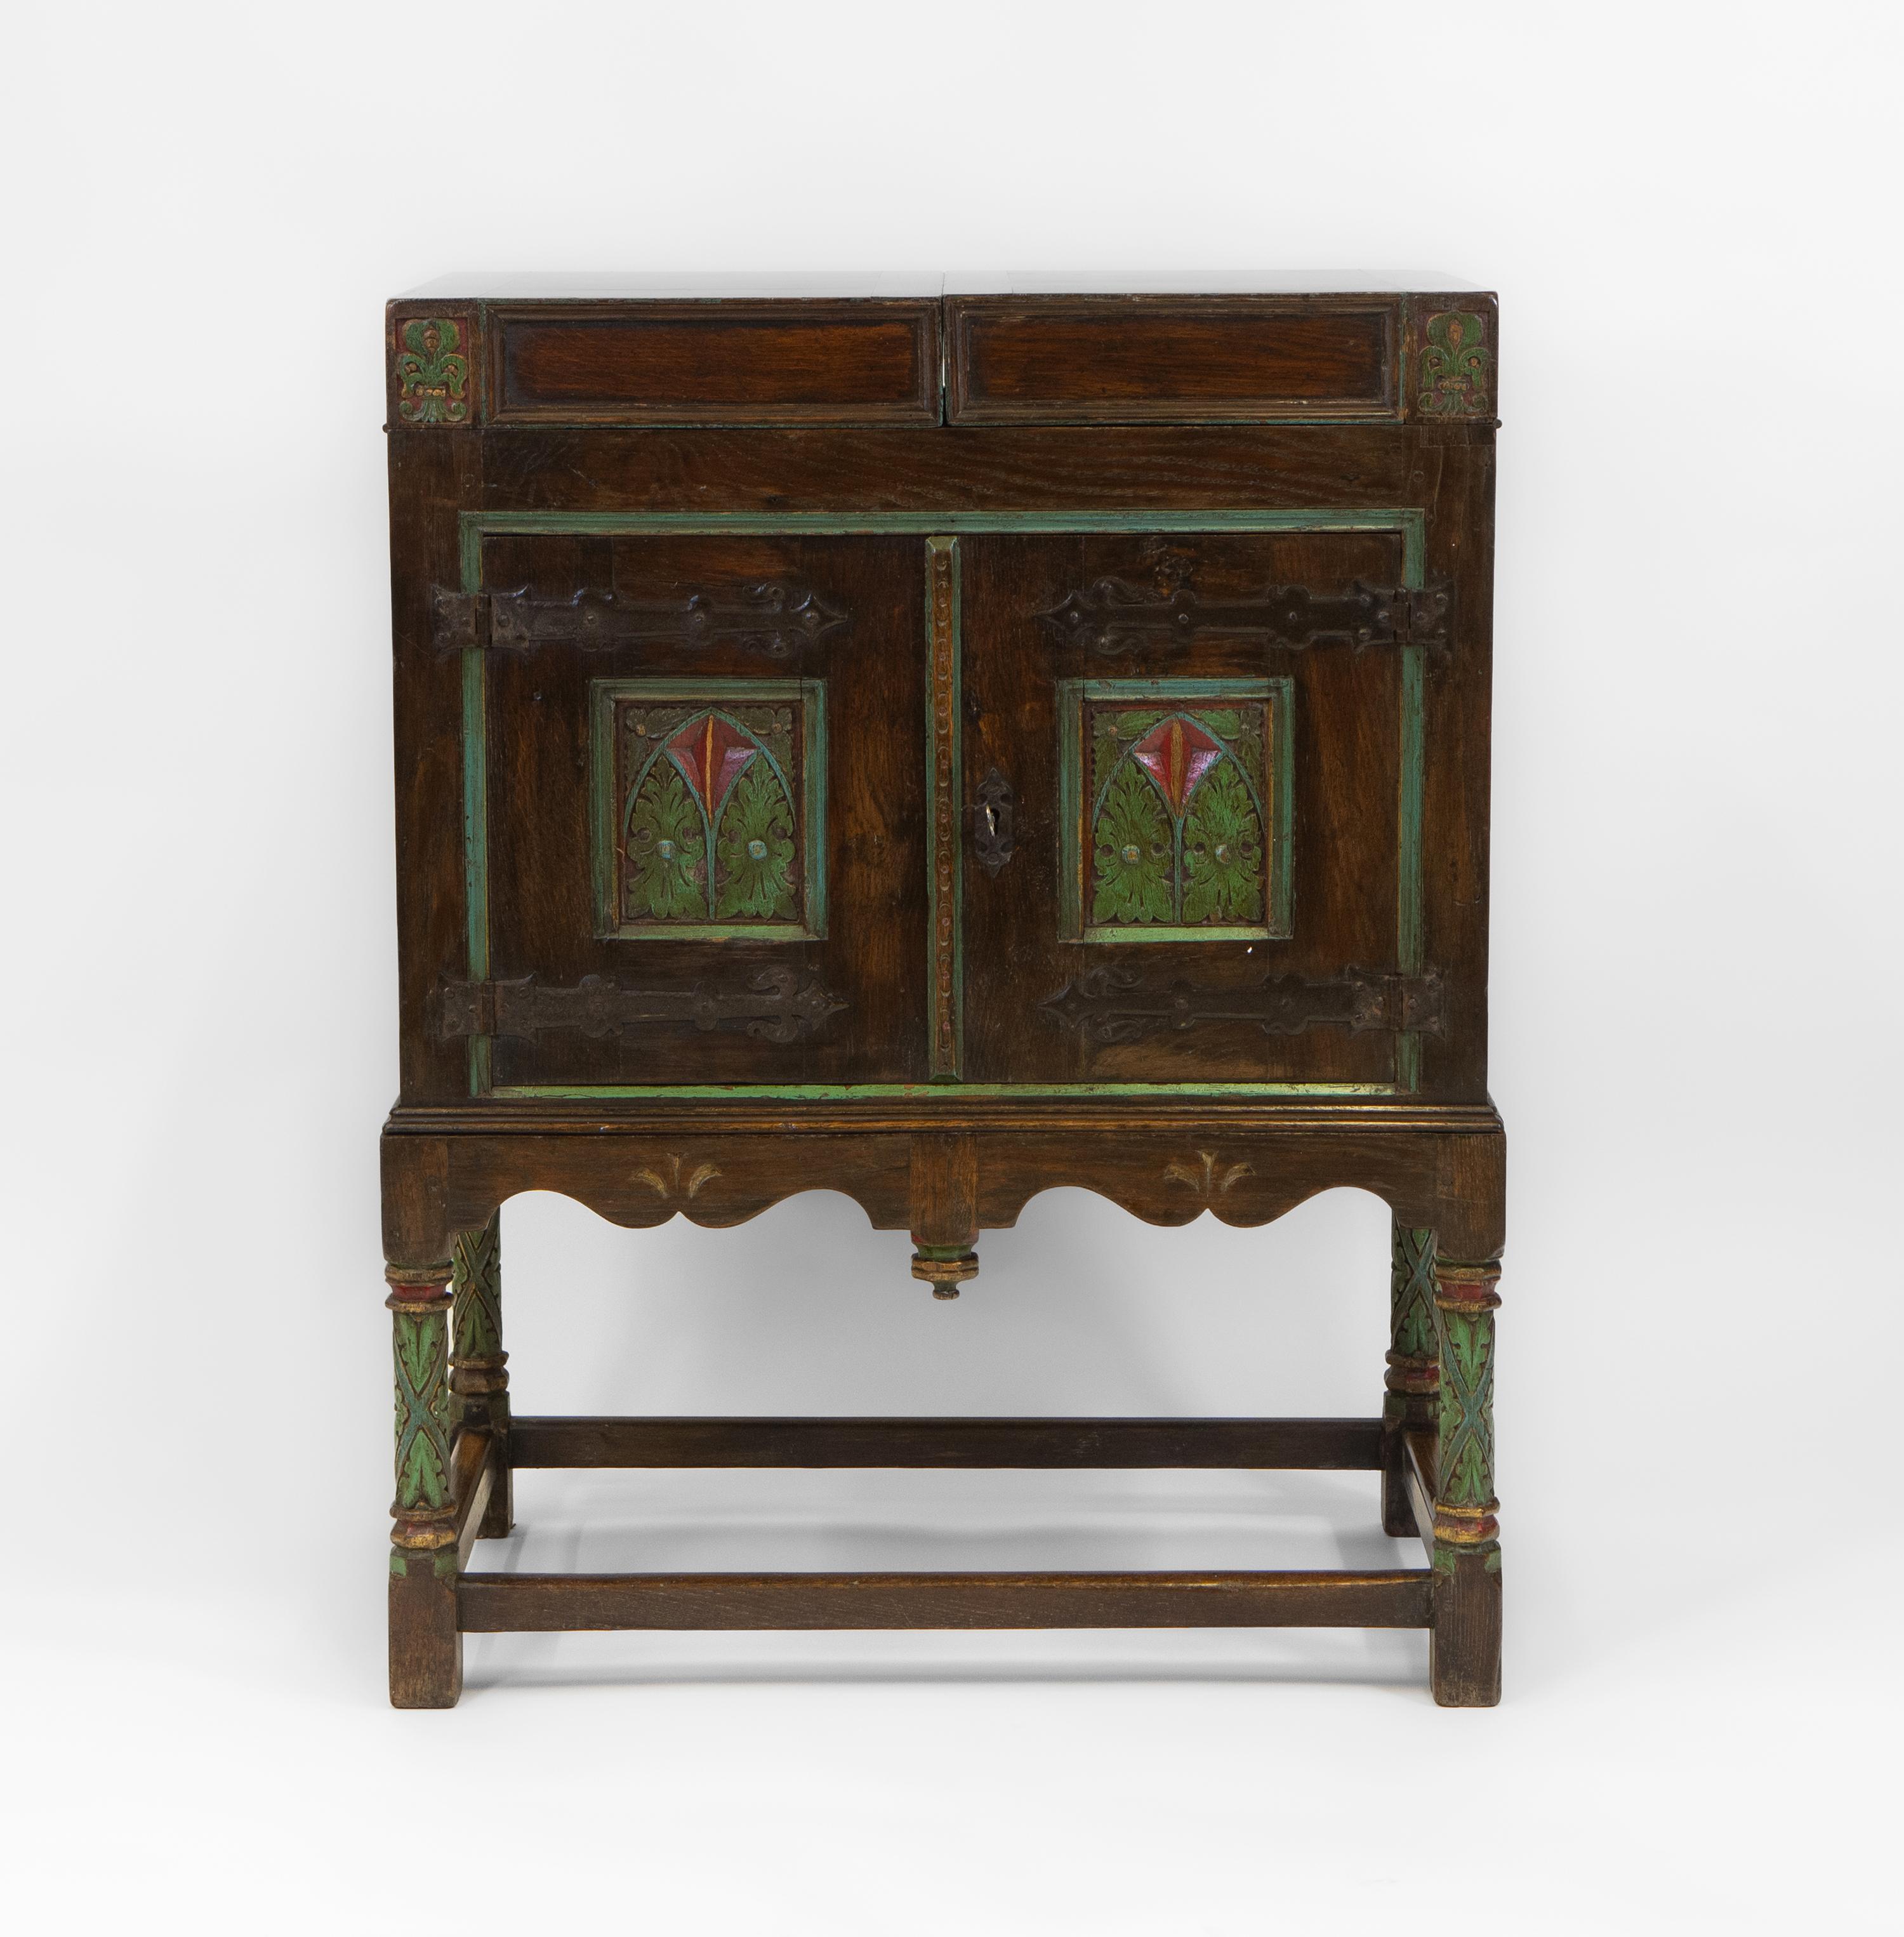 An interesting Gothic Revival / Arts & Crafts oak & polychrome painted cabinet. English. Circa 1920’s. 

Perfect for use as a drinks cabinet, the storage compartment on top neatly folds out, allowing for room to stand bottles and glasses etc.

Made